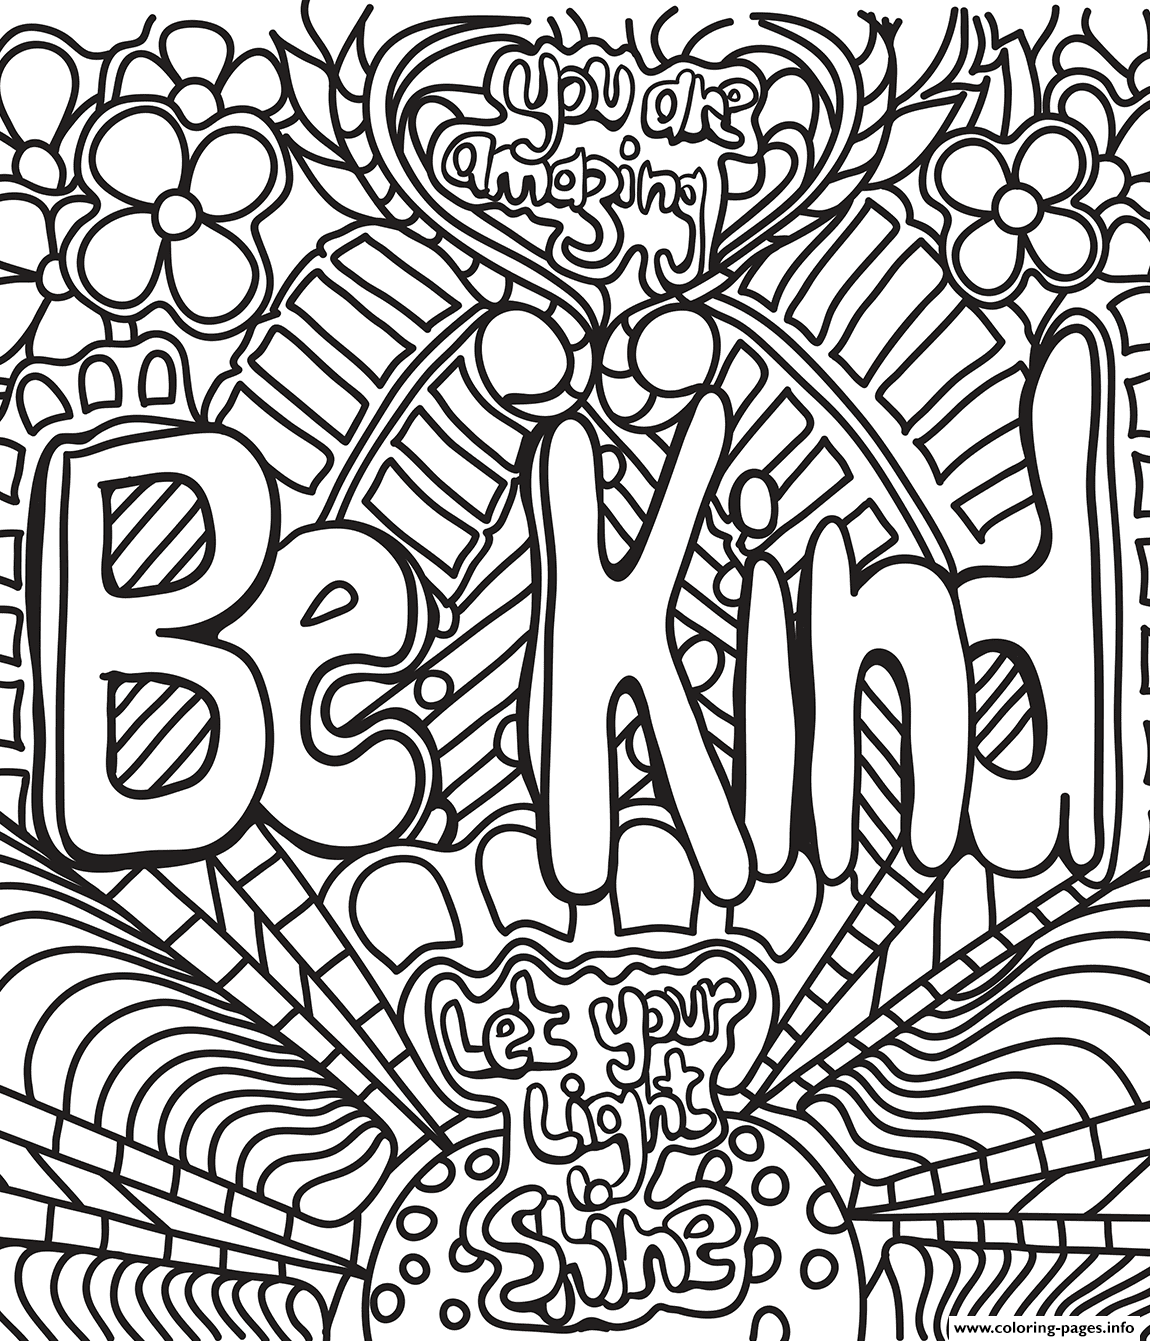 Be Kind Coloring Pages Printable